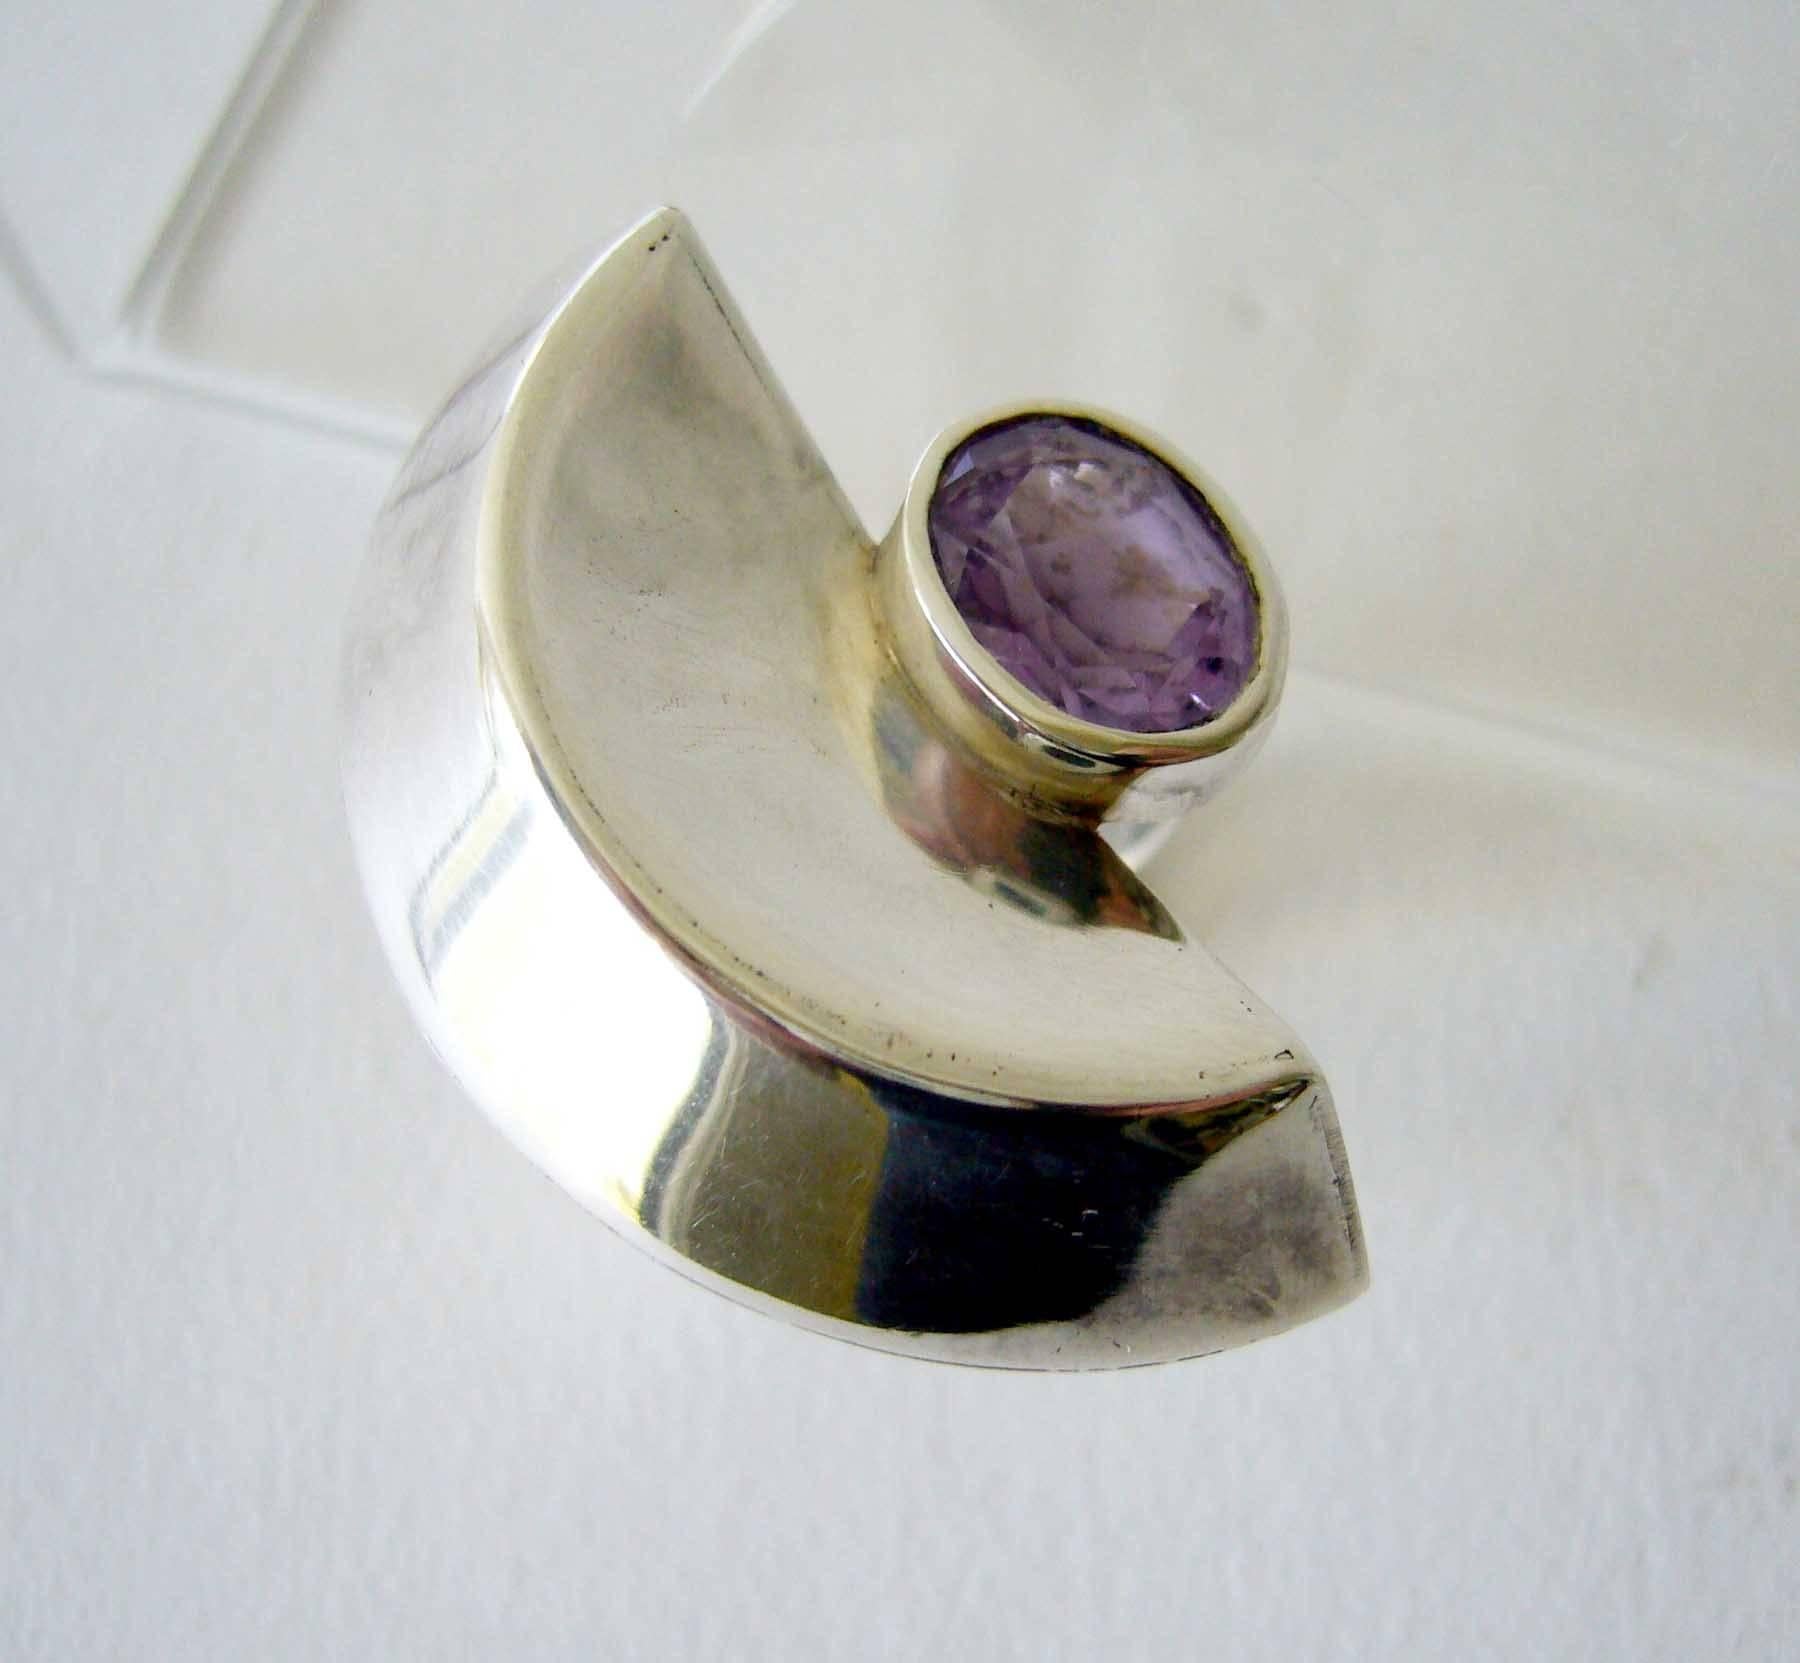 1970's sterling silver ring with faceted amethyst stone created by French jeweler Suzanne Somogy.  Ring is a finger size 6.5 and its face measures 1 3/8